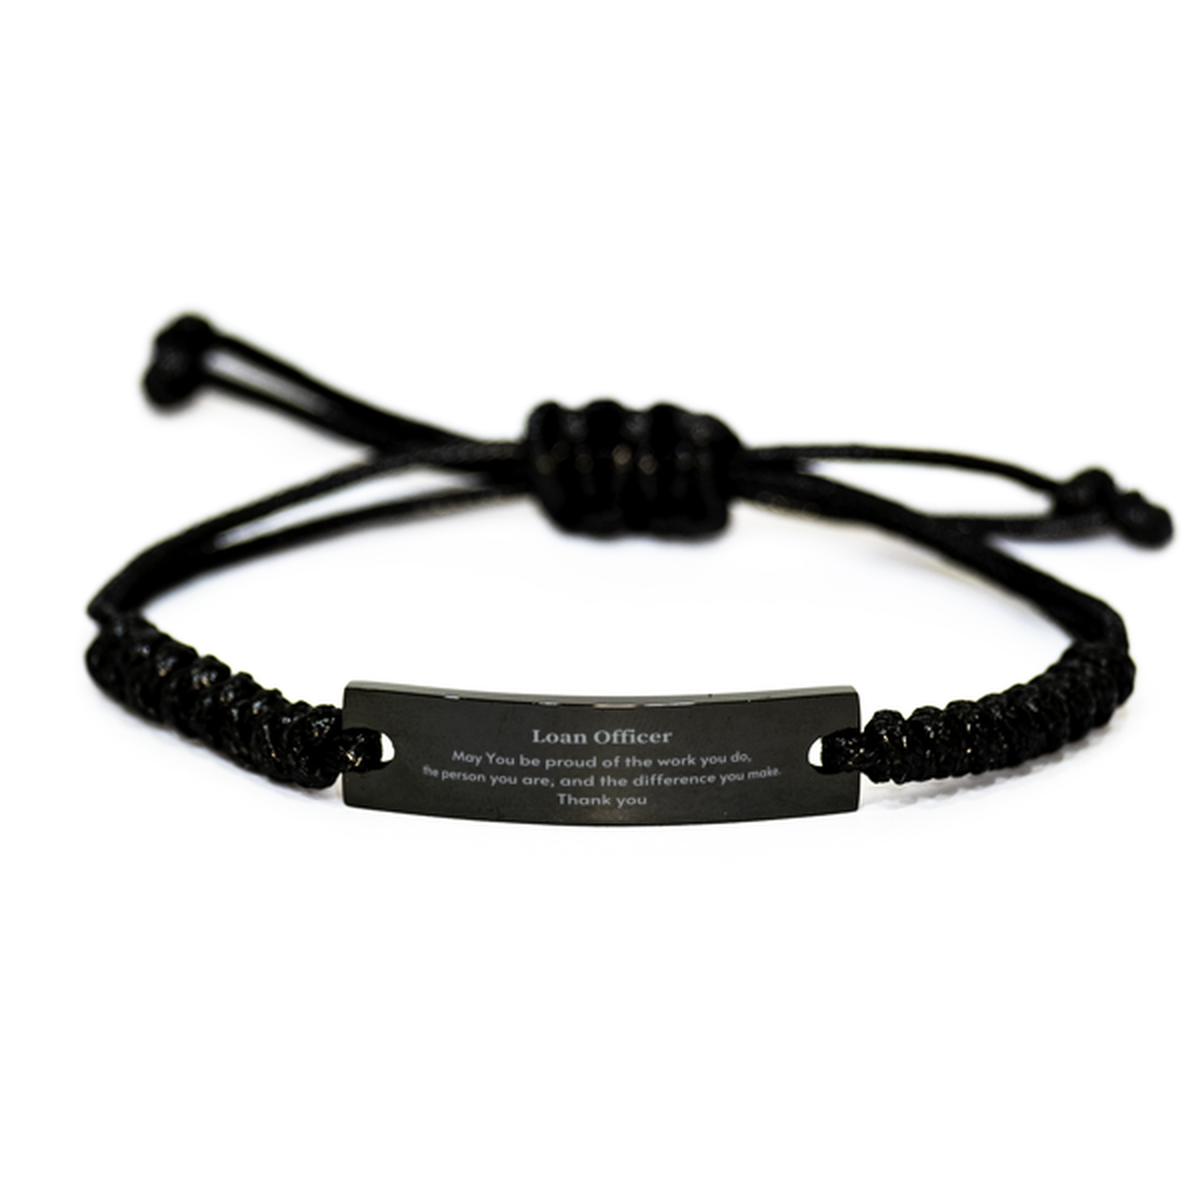 Heartwarming Black Rope Bracelet Retirement Coworkers Gifts for Loan Officer, Loan Officer May You be proud of the work you do, the person you are Gifts for Boss Men Women Friends